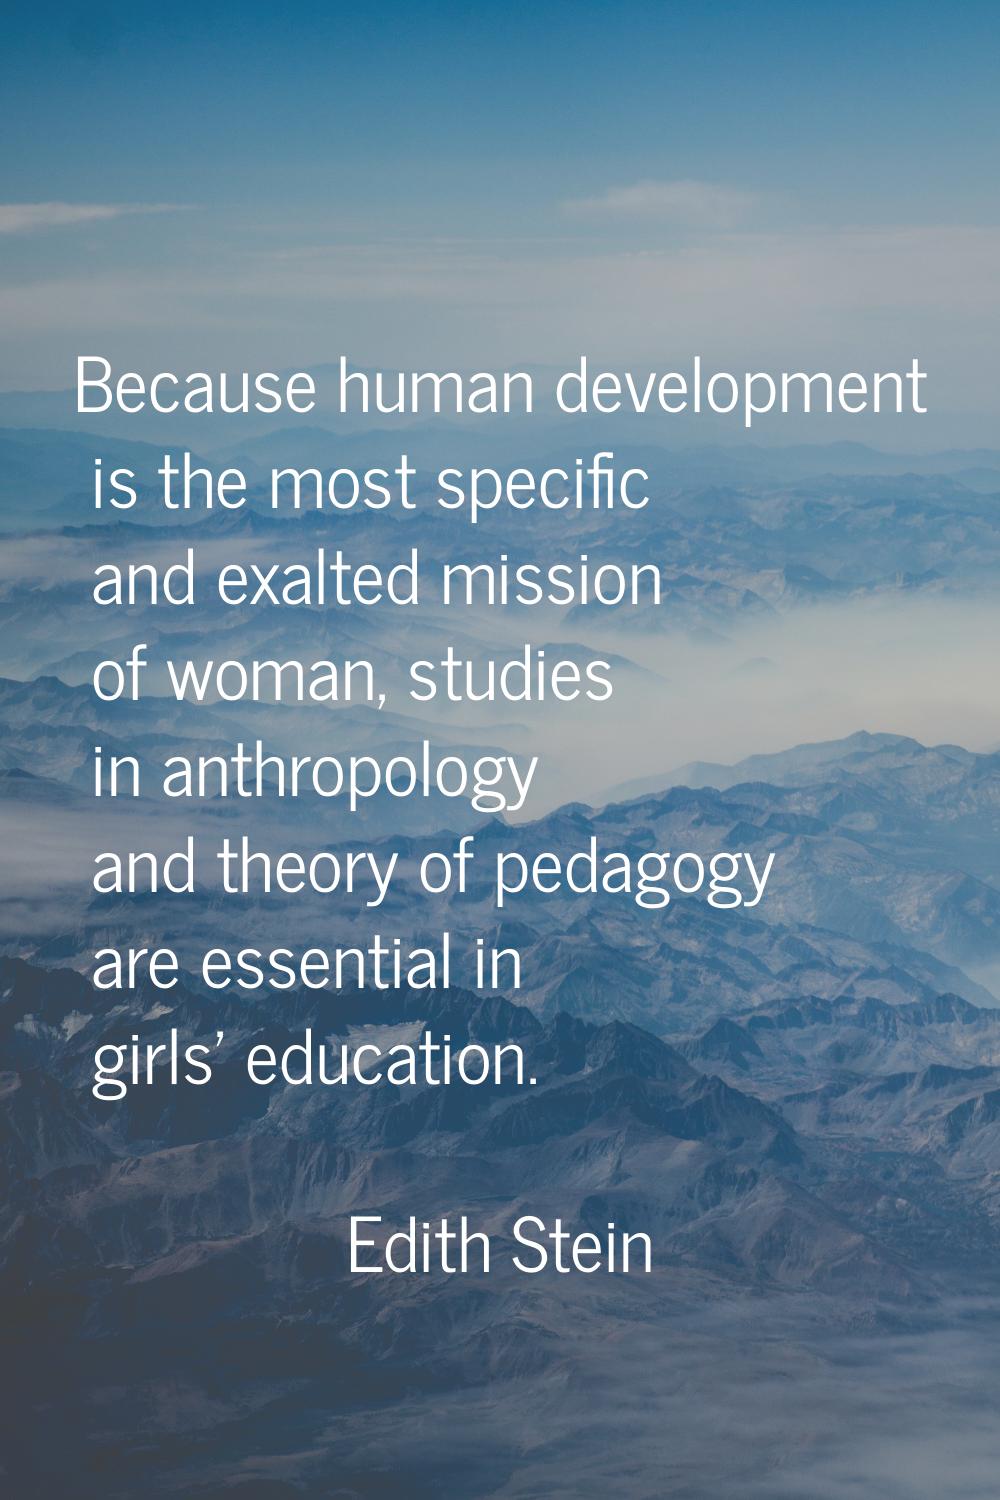 Because human development is the most specific and exalted mission of woman, studies in anthropolog